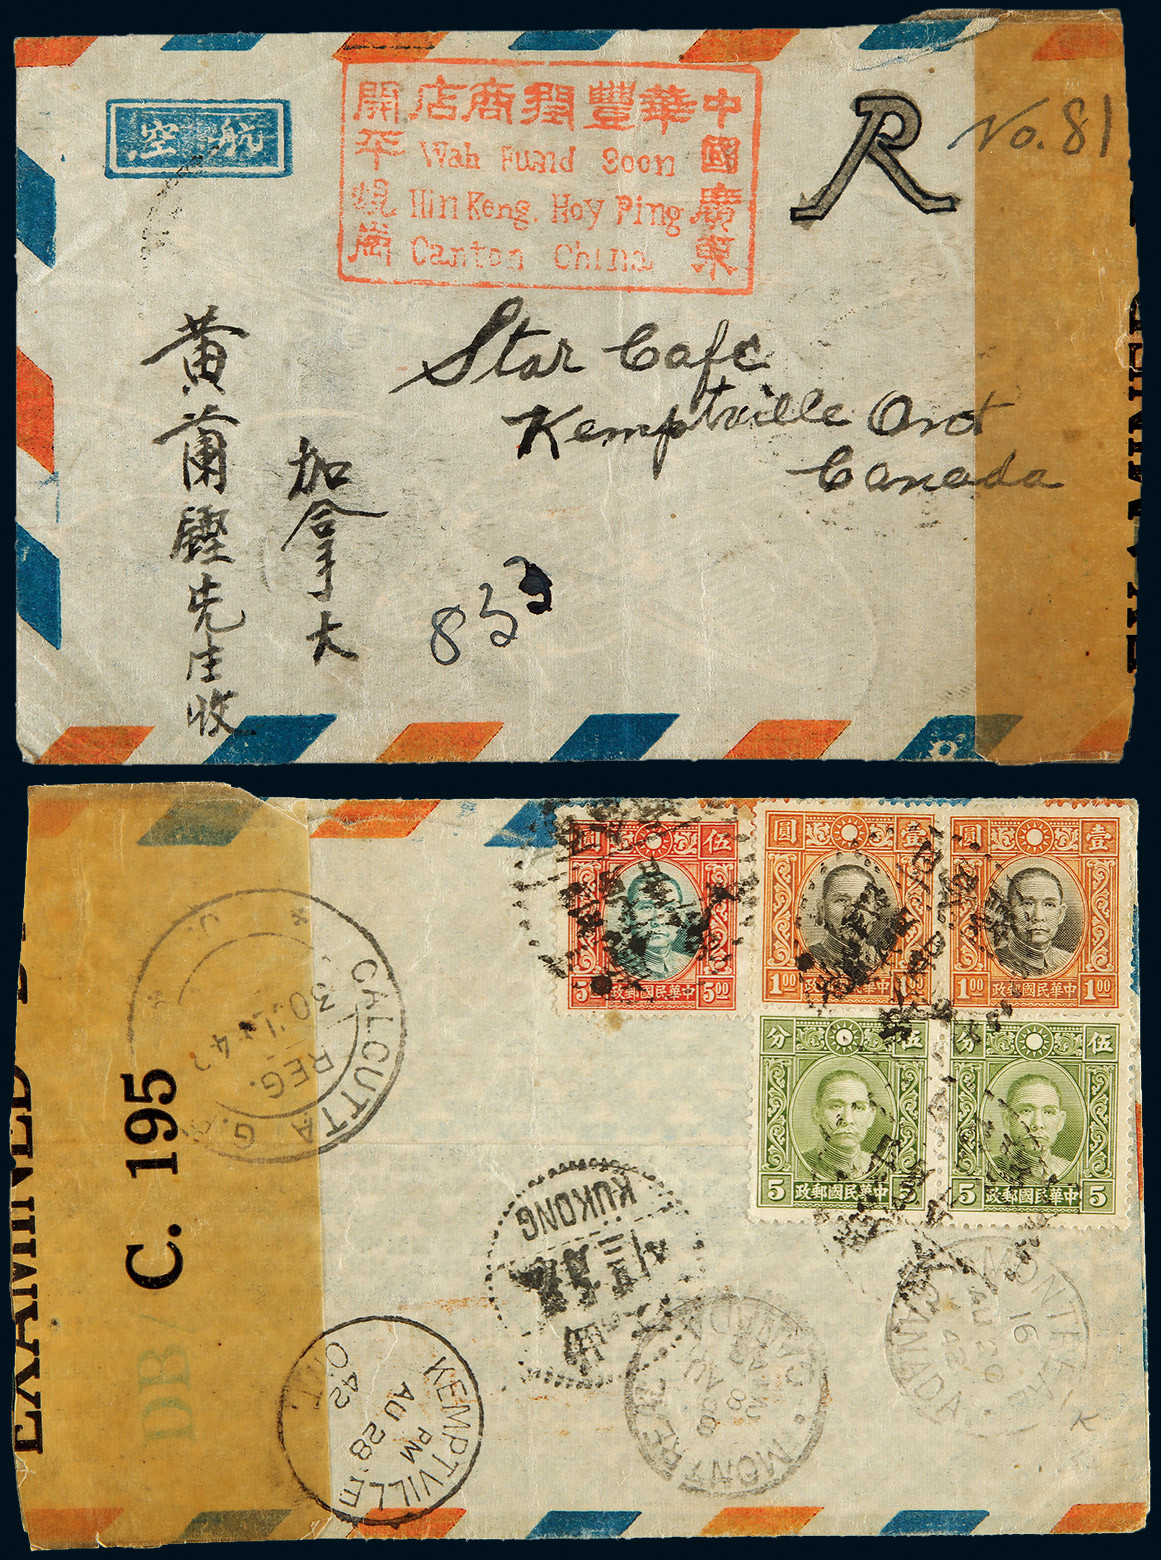 1942 Registered cencorship cover sent from Jiangang to Canada. Nice condition.